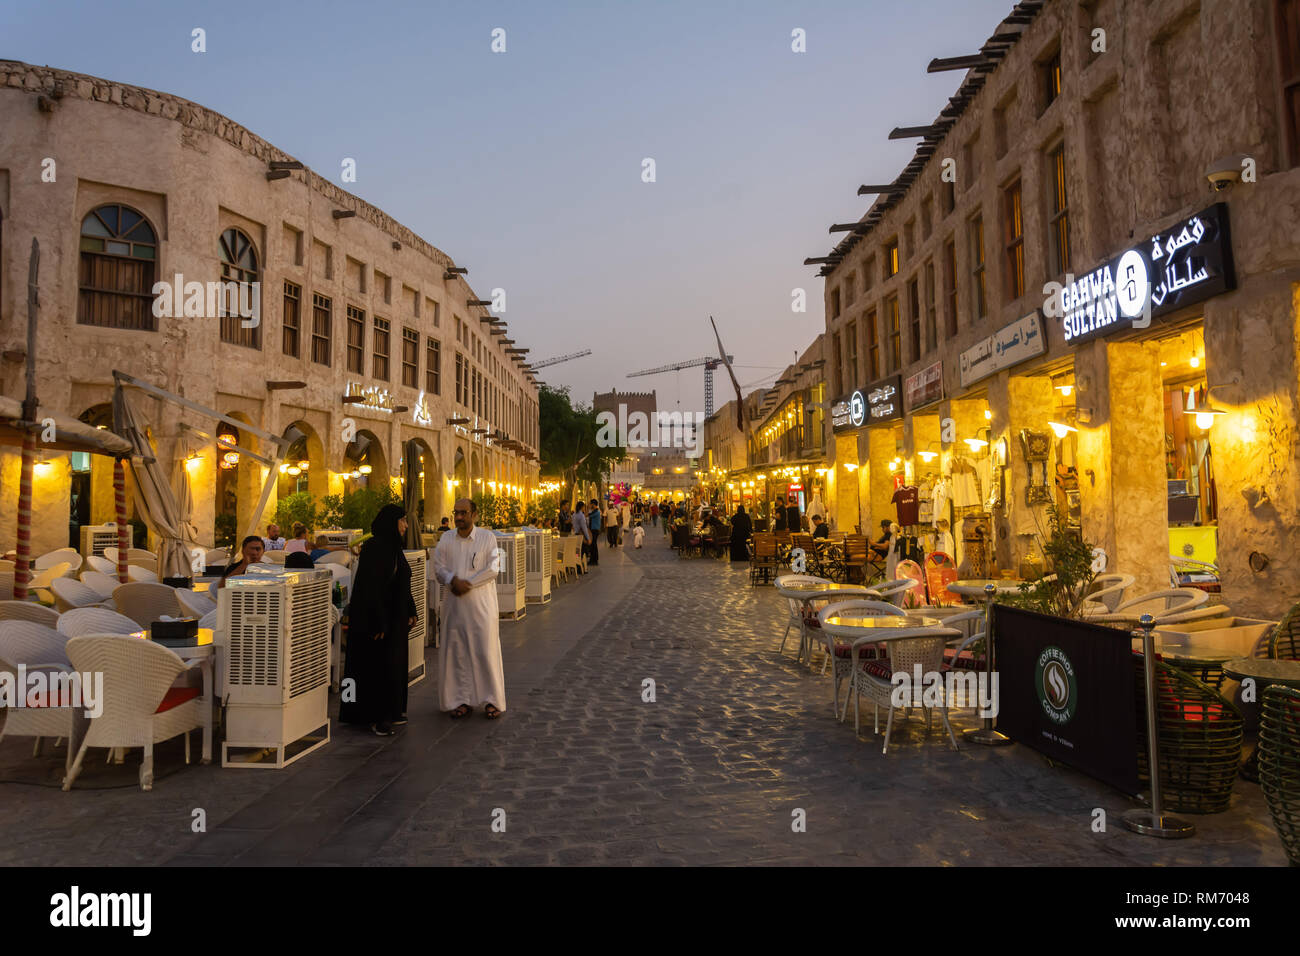 Doha, Qatar - November 3, 2016. Street view in Souq Waqif market in Doha, with historic buildings, commercial properties and people, at night. Stock Photo